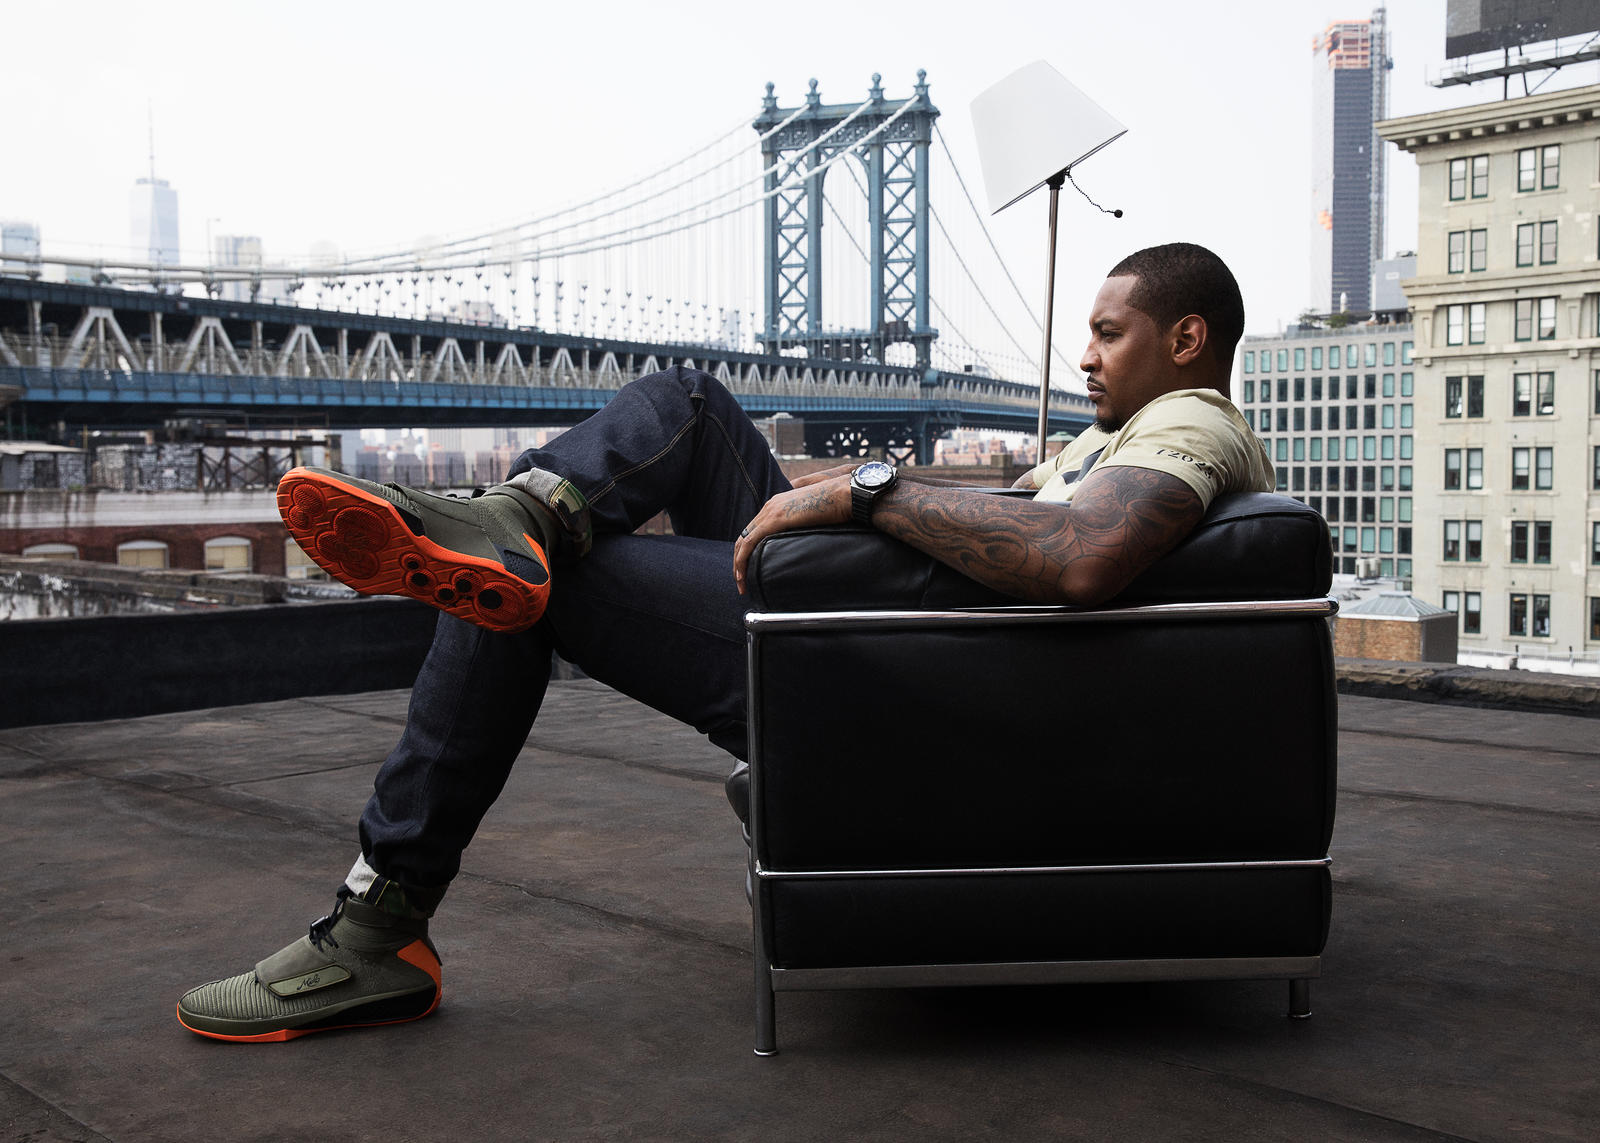 carmelo anthony shoe collection